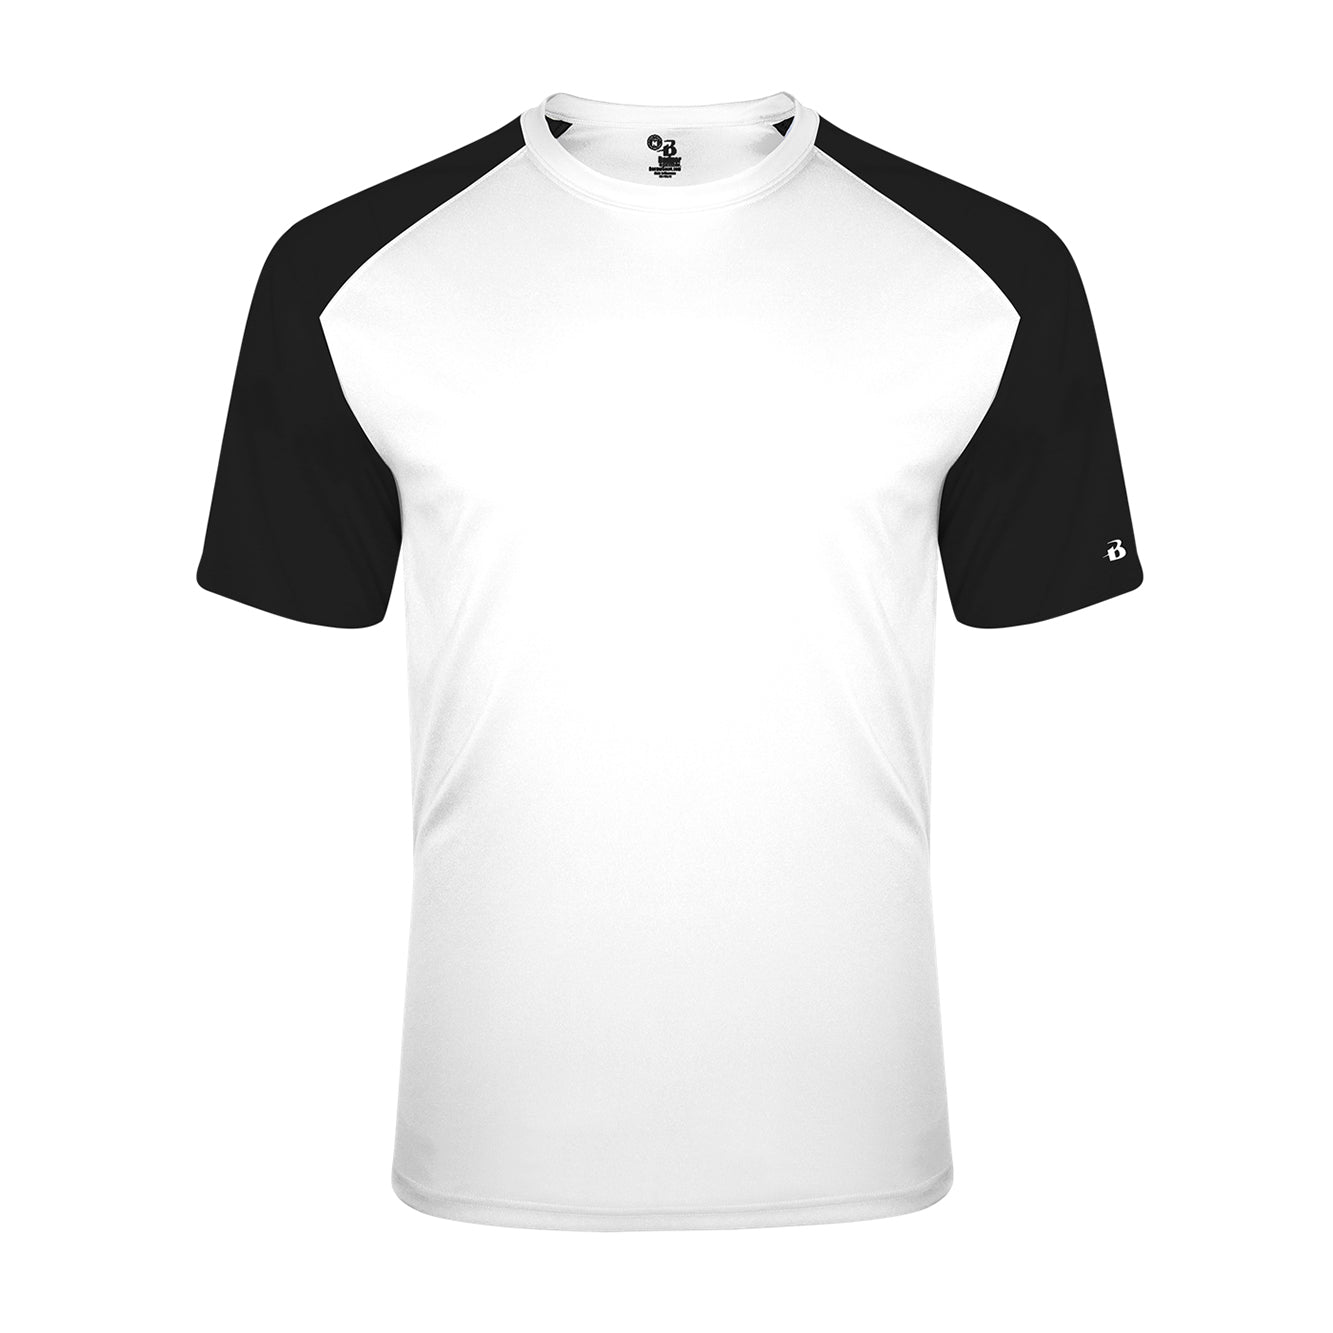 Breakout Performance Jersey - Youth